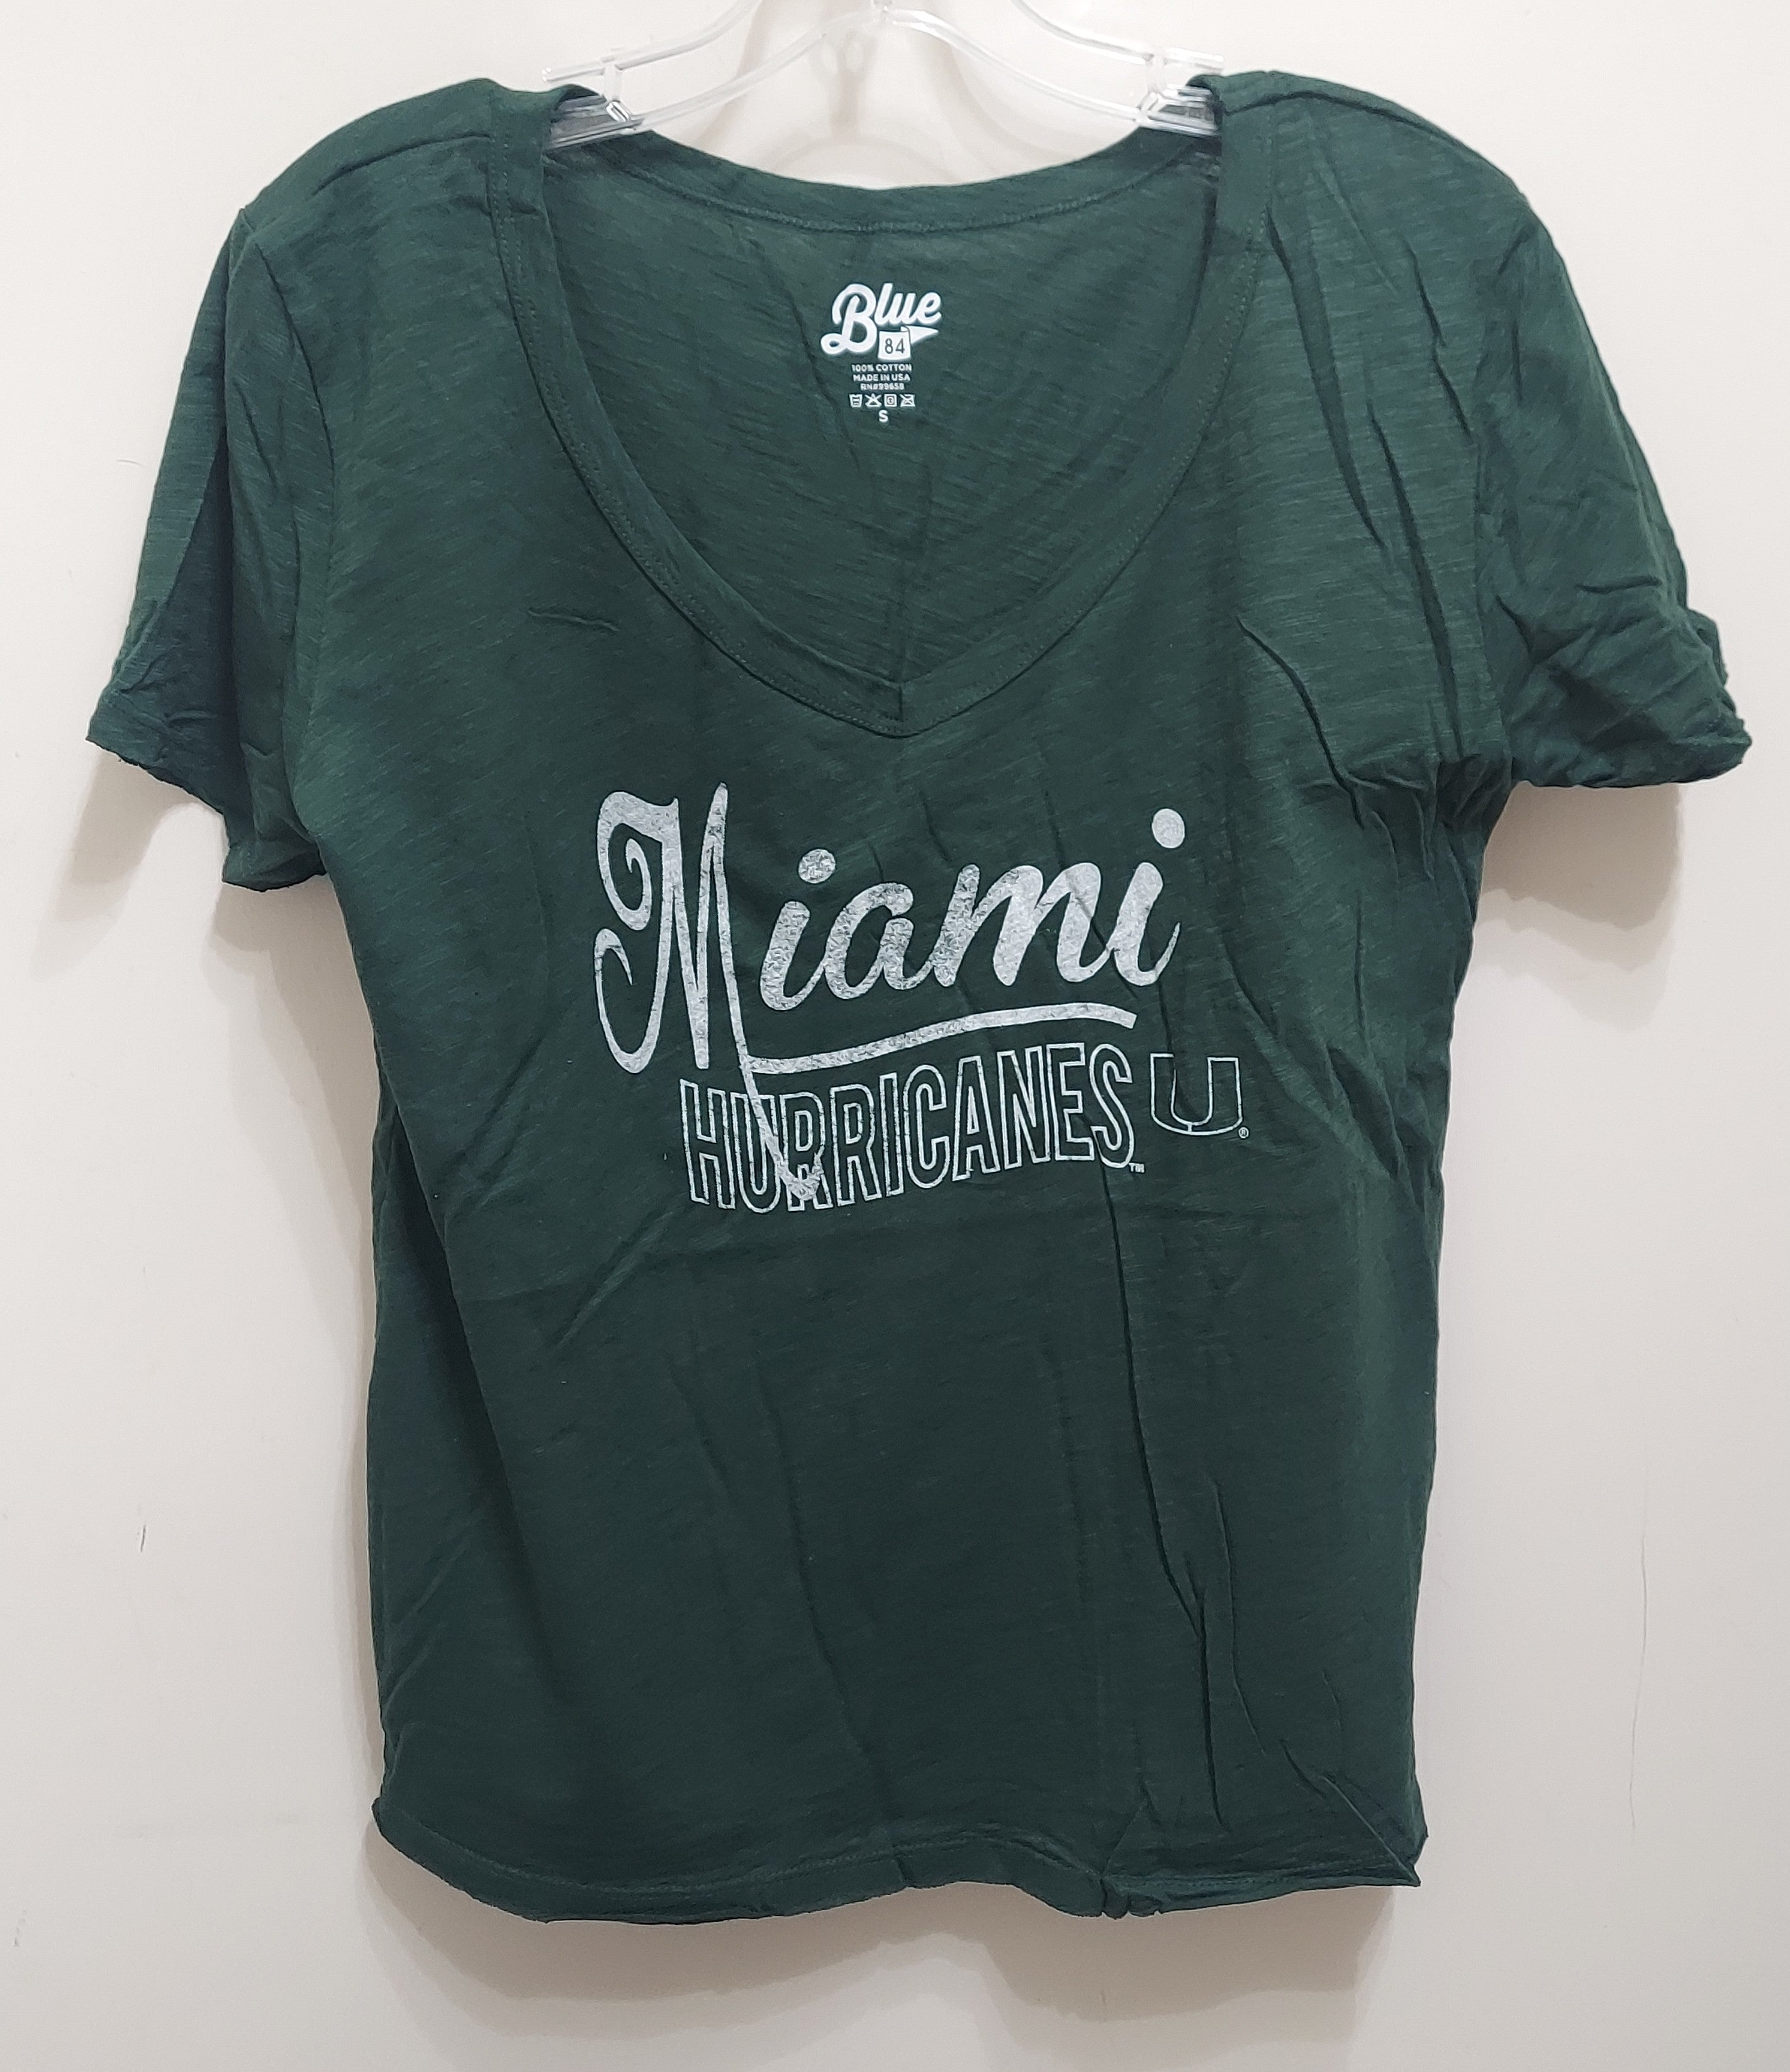 Miami Hurricanes Women's Relaxed Fit Jena Scrimmage T-Shirt - Green